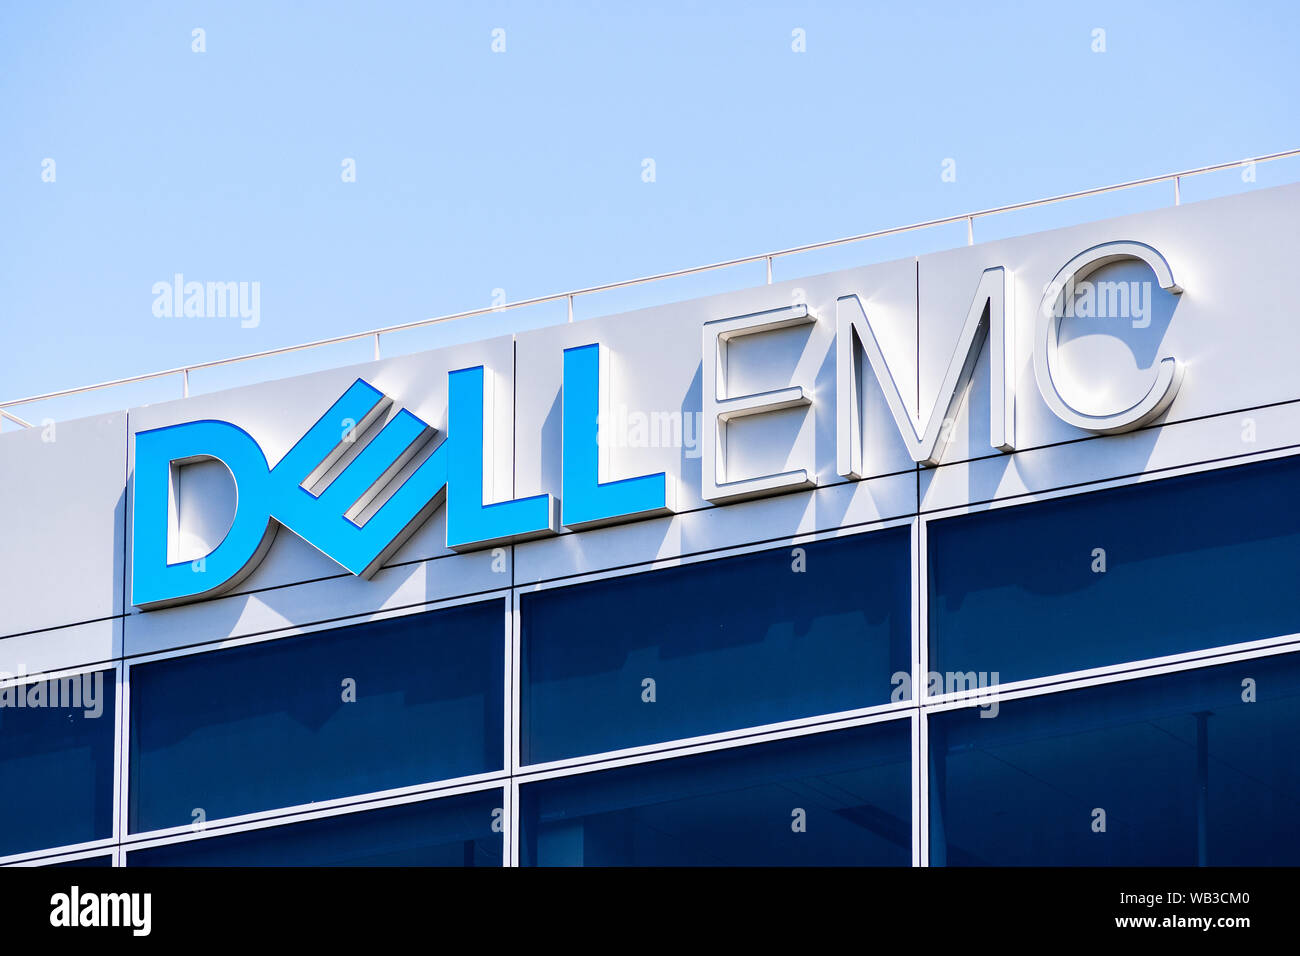 July 30, 2019 Santa Clara / CA / USA - Close up of DellEmc logo at their headquarters in Silicon Valley; DellEmc is an American multinational informat Stock Photo